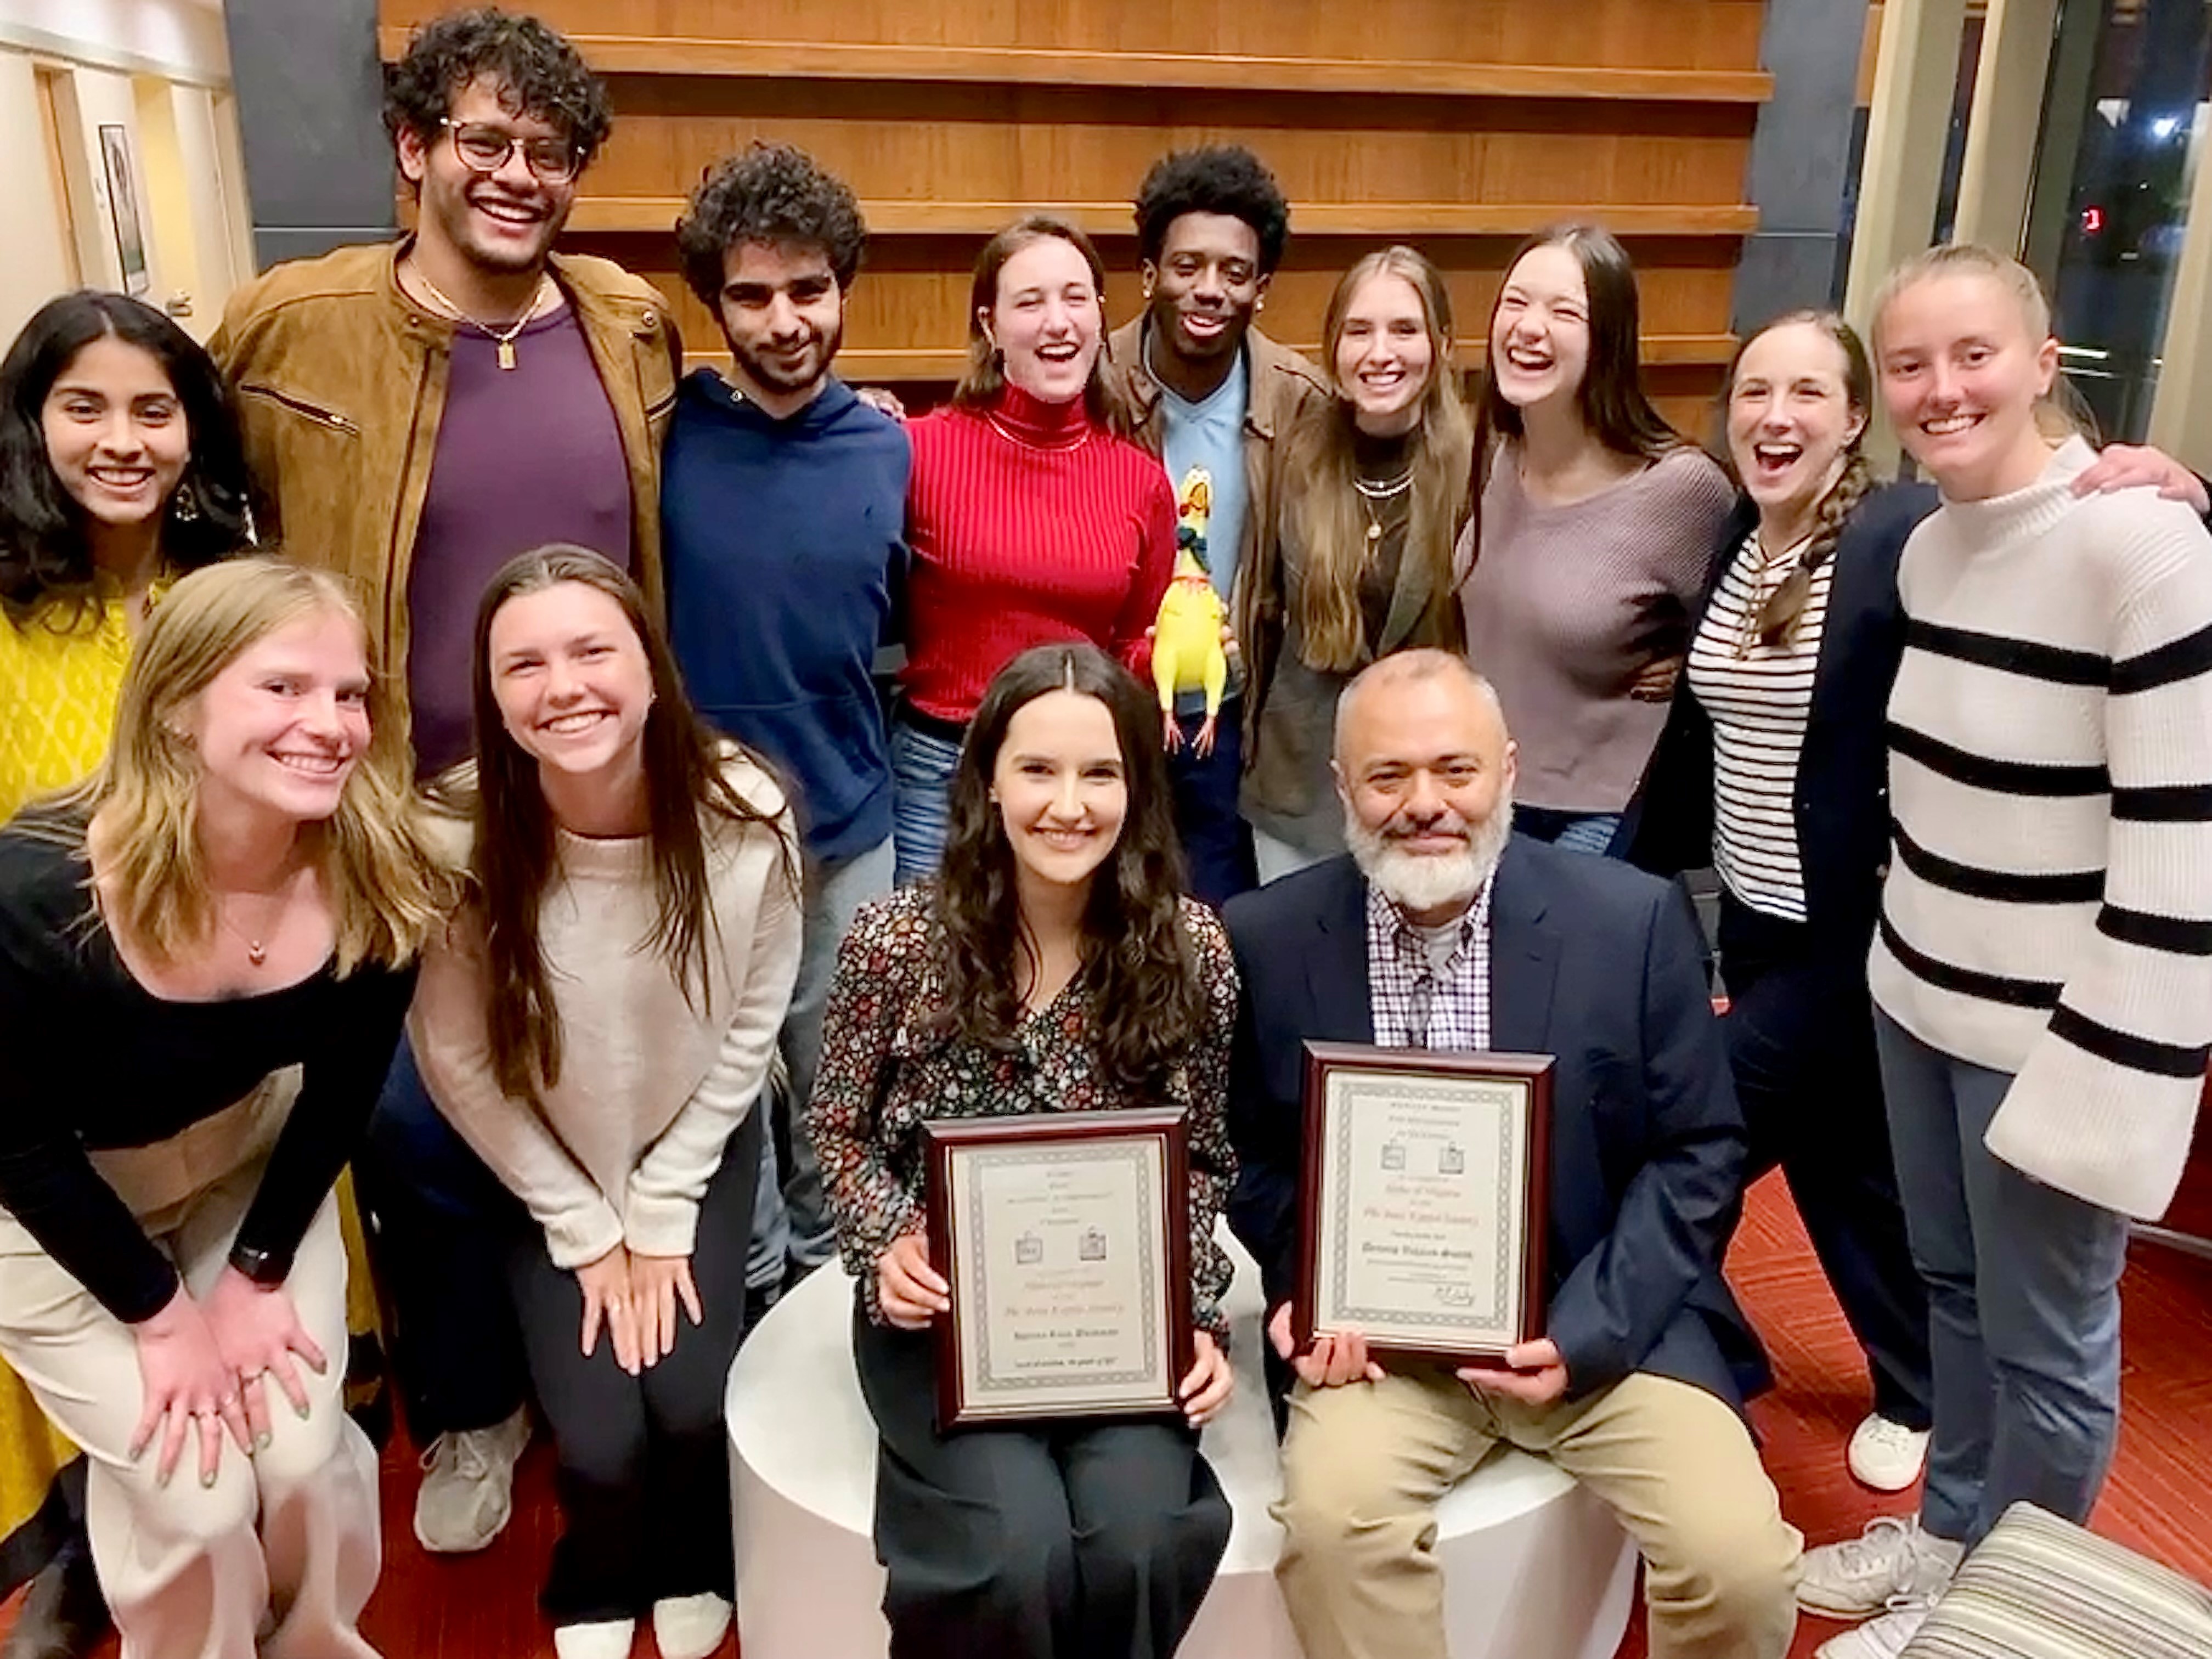 Award recipients Helena Buckham (left) and Professor Smith (right) with the PIPS scholars